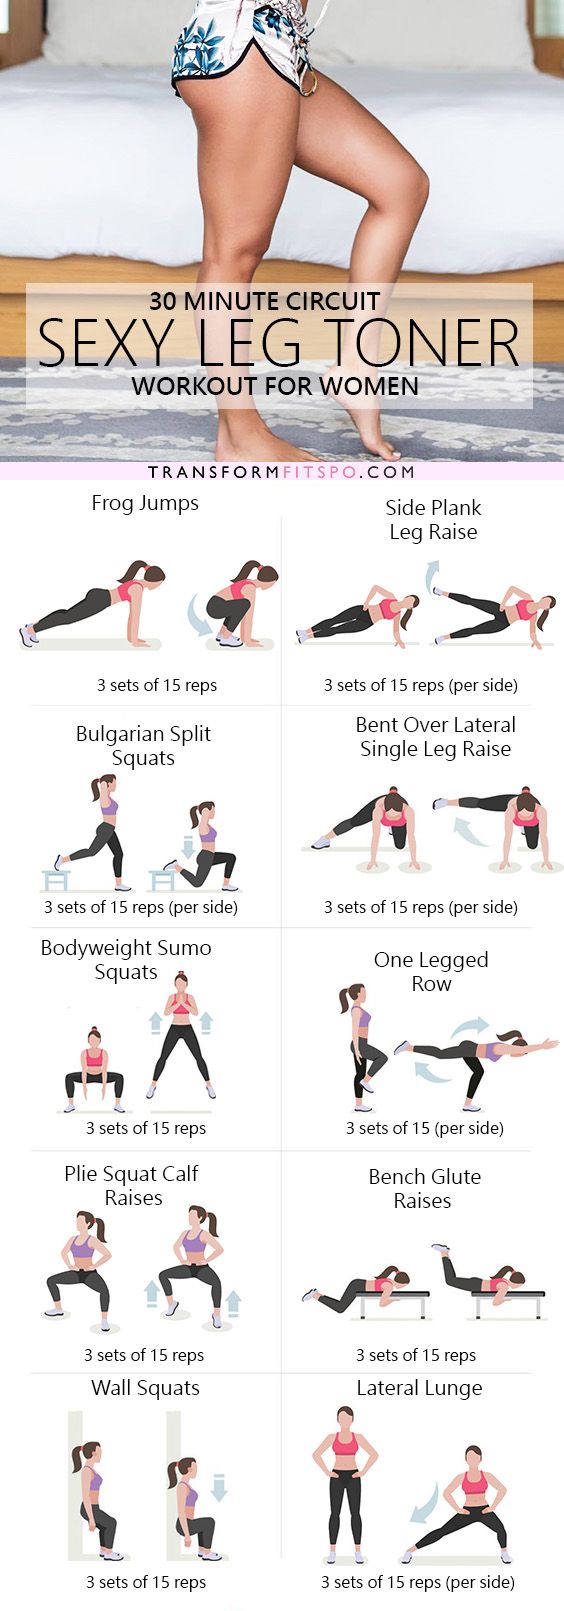 30-day-hourglass-figure-workout-great-offers-save-48-jlcatj-gob-mx